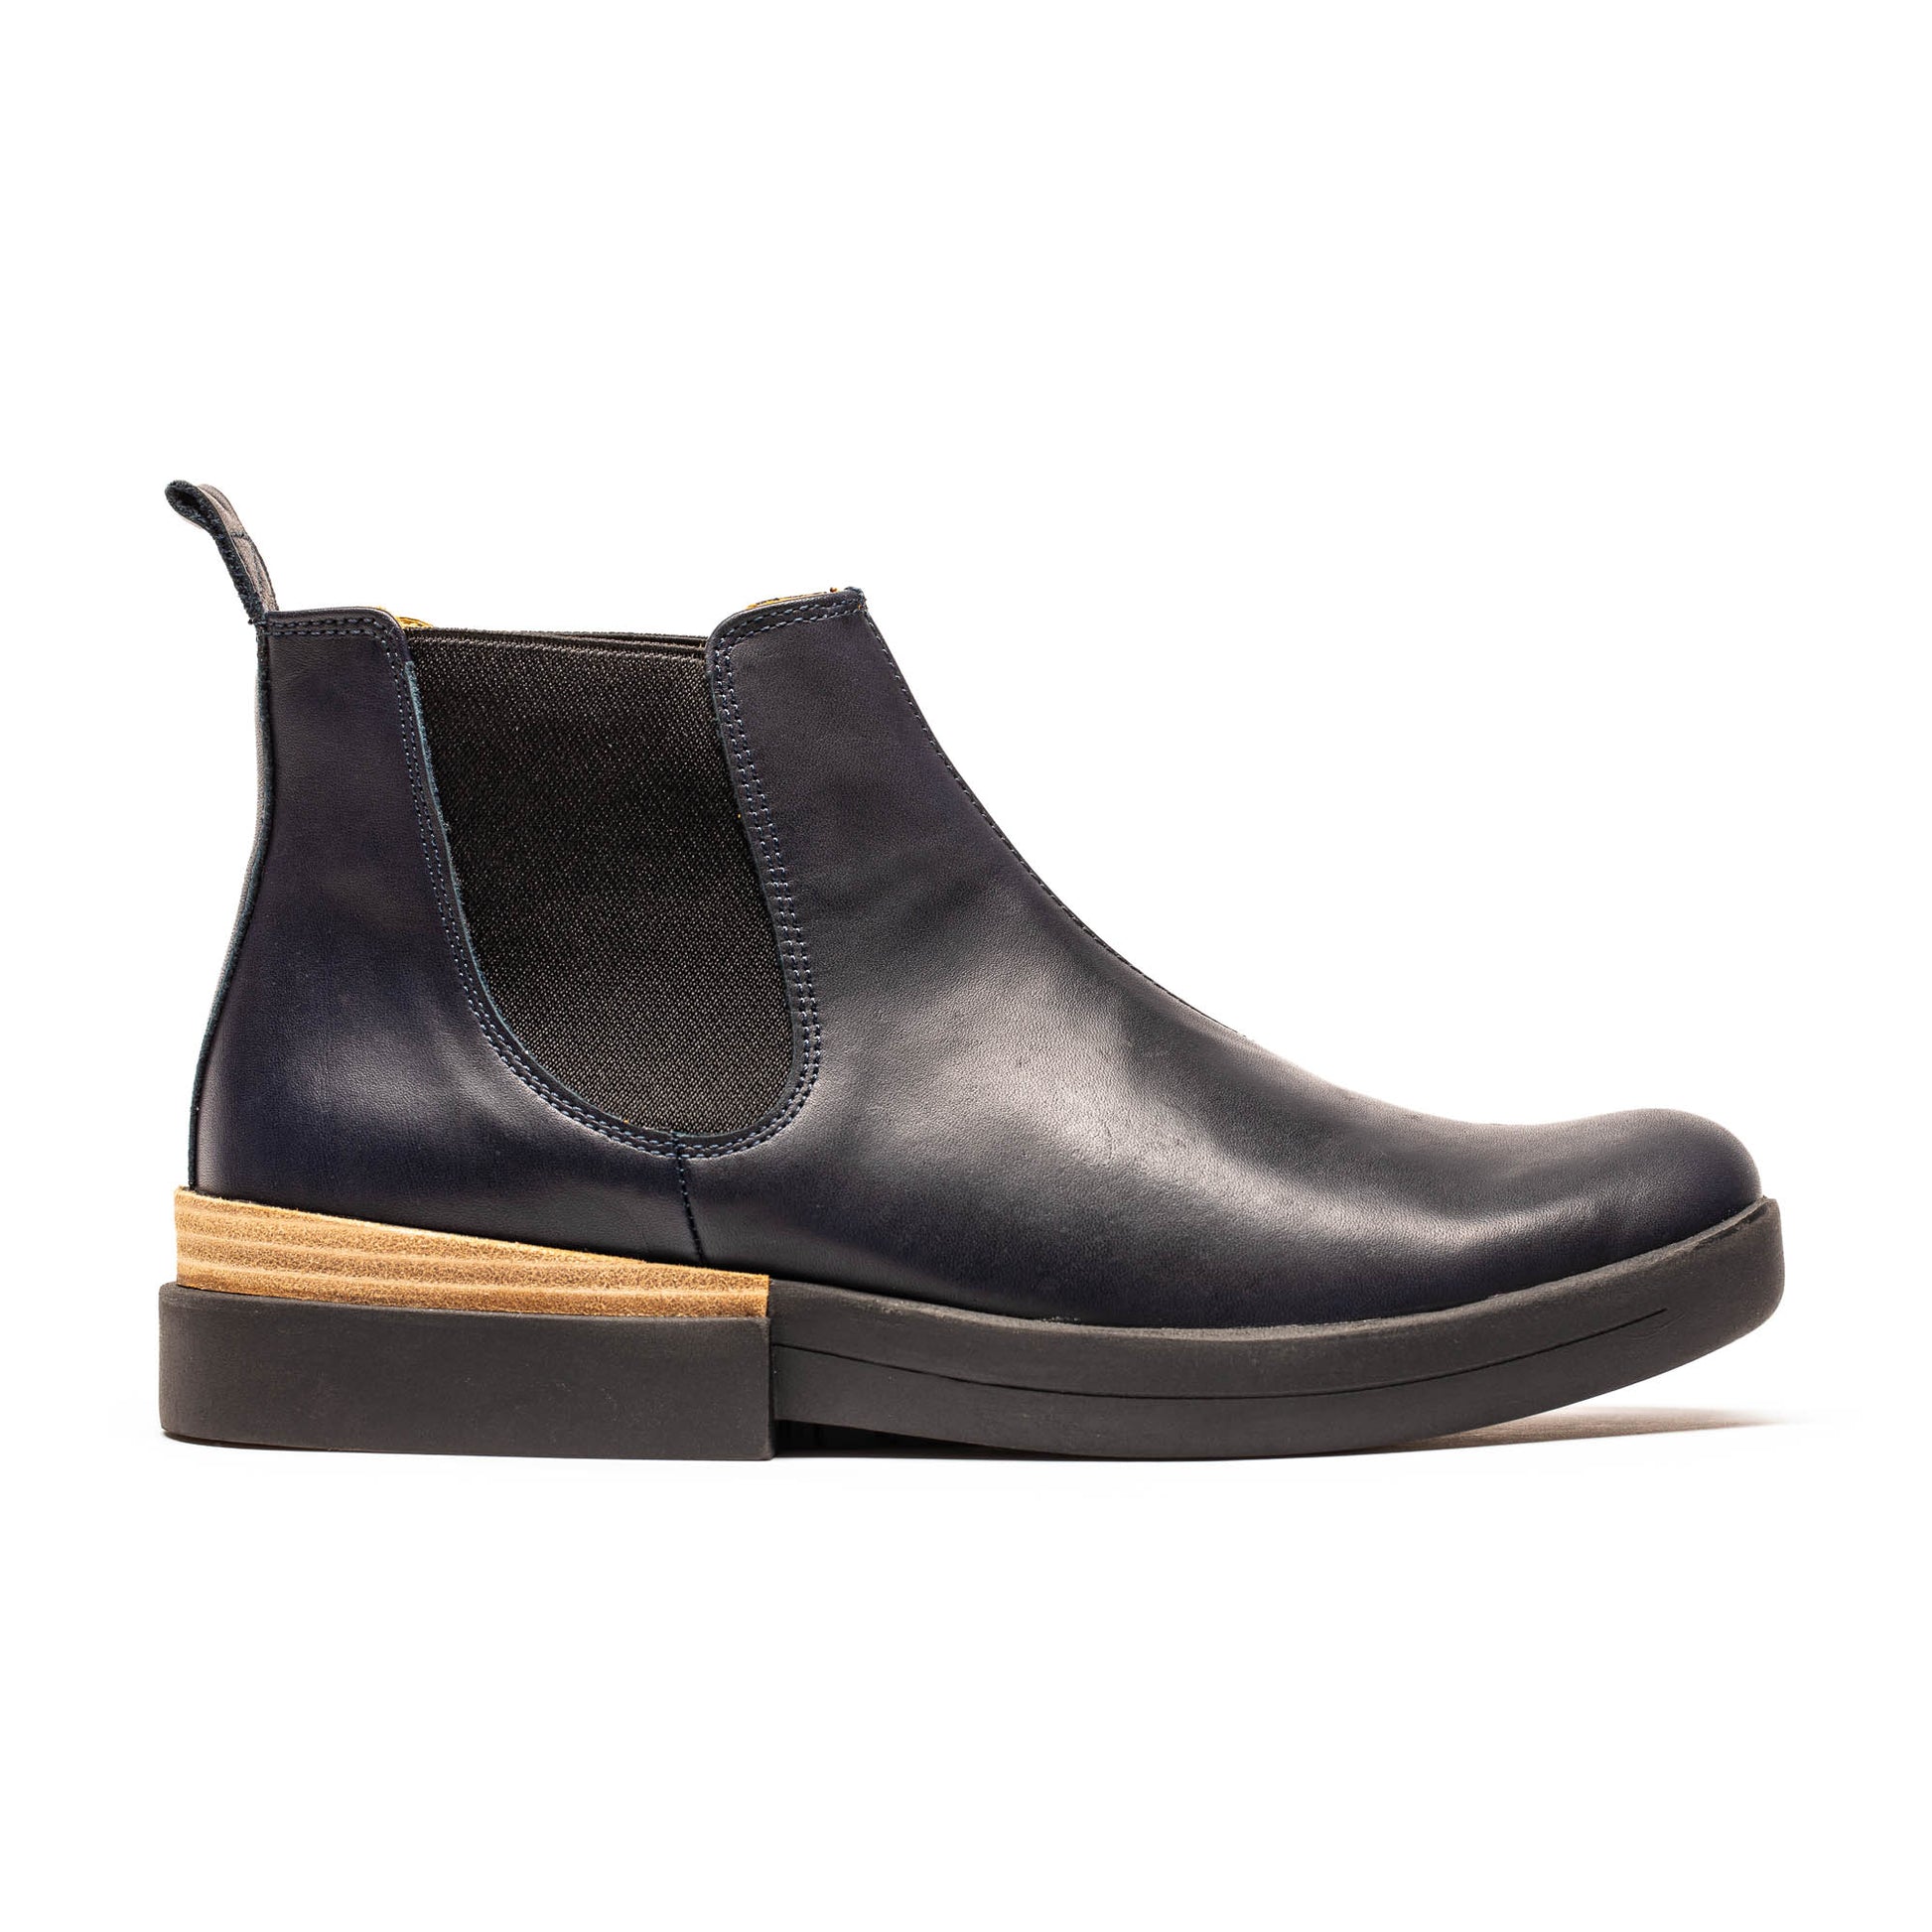 navy women's leather chelsea boot by designer tracey neuls